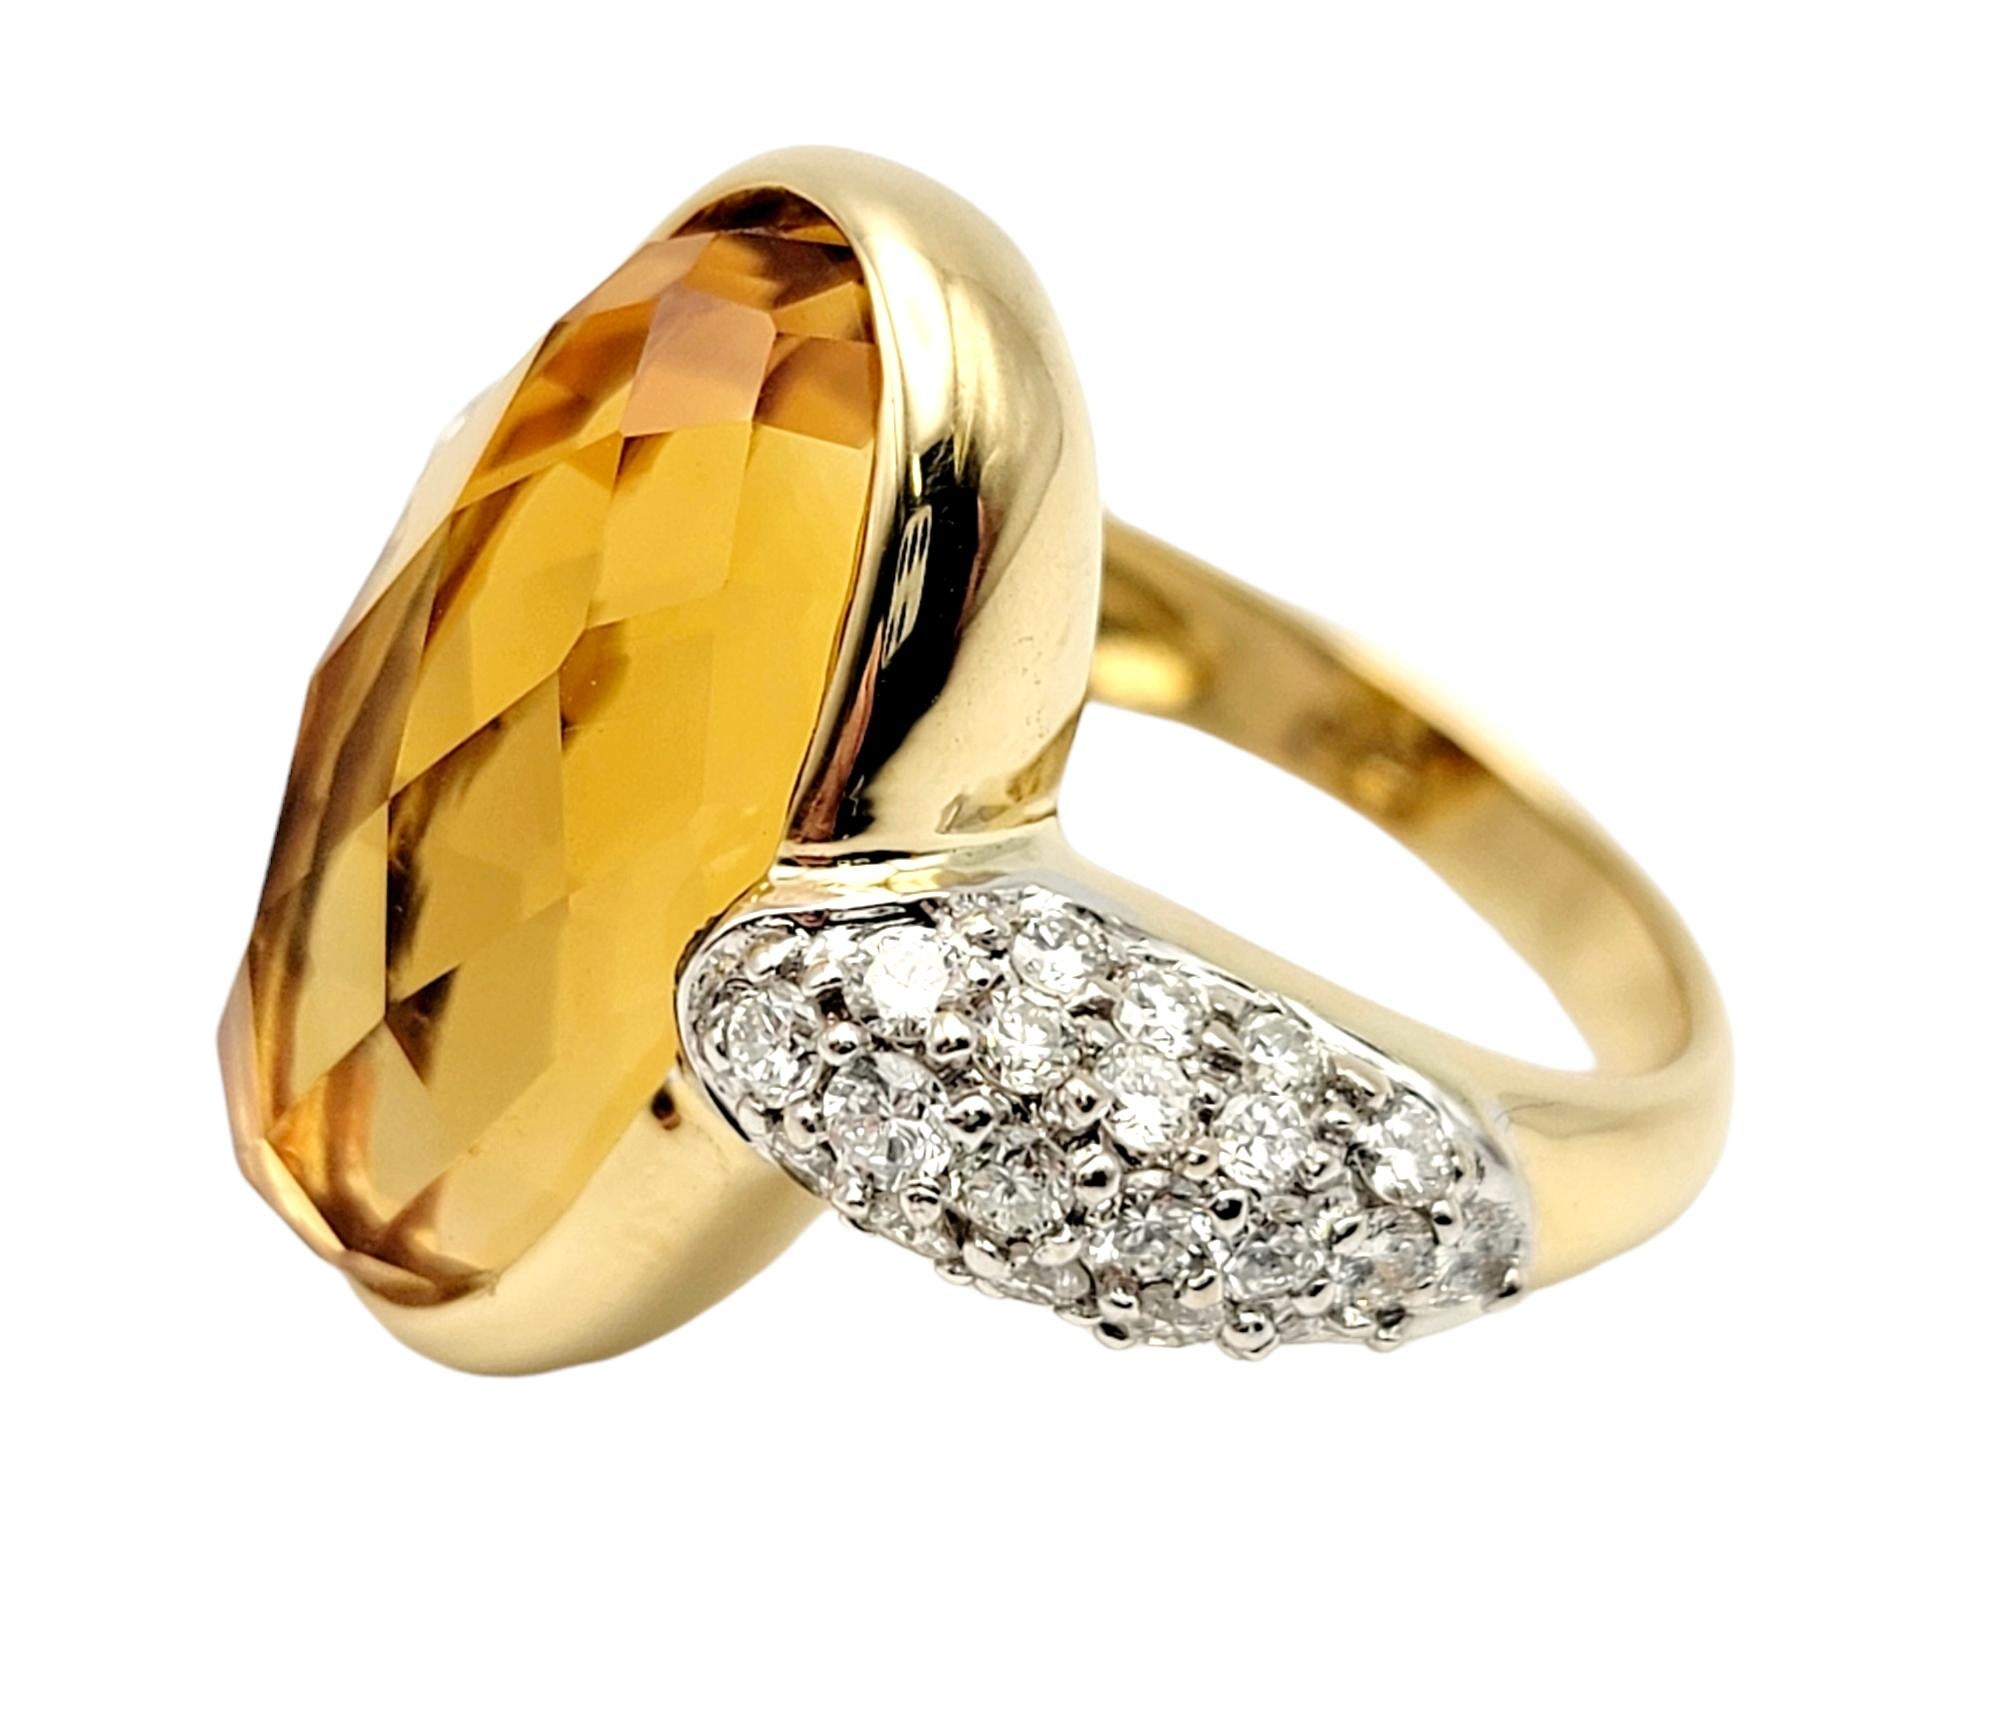 Ring size: 5

Gorgeous and unique fancy cut citrine and diamond ring flatters and elongates the finger while the sparkling stones glow against the warm yellow gold setting.  

Ring size: 5
Metal: 18 Karat Yellow Gold
Weight: 8.1 grams
Natural